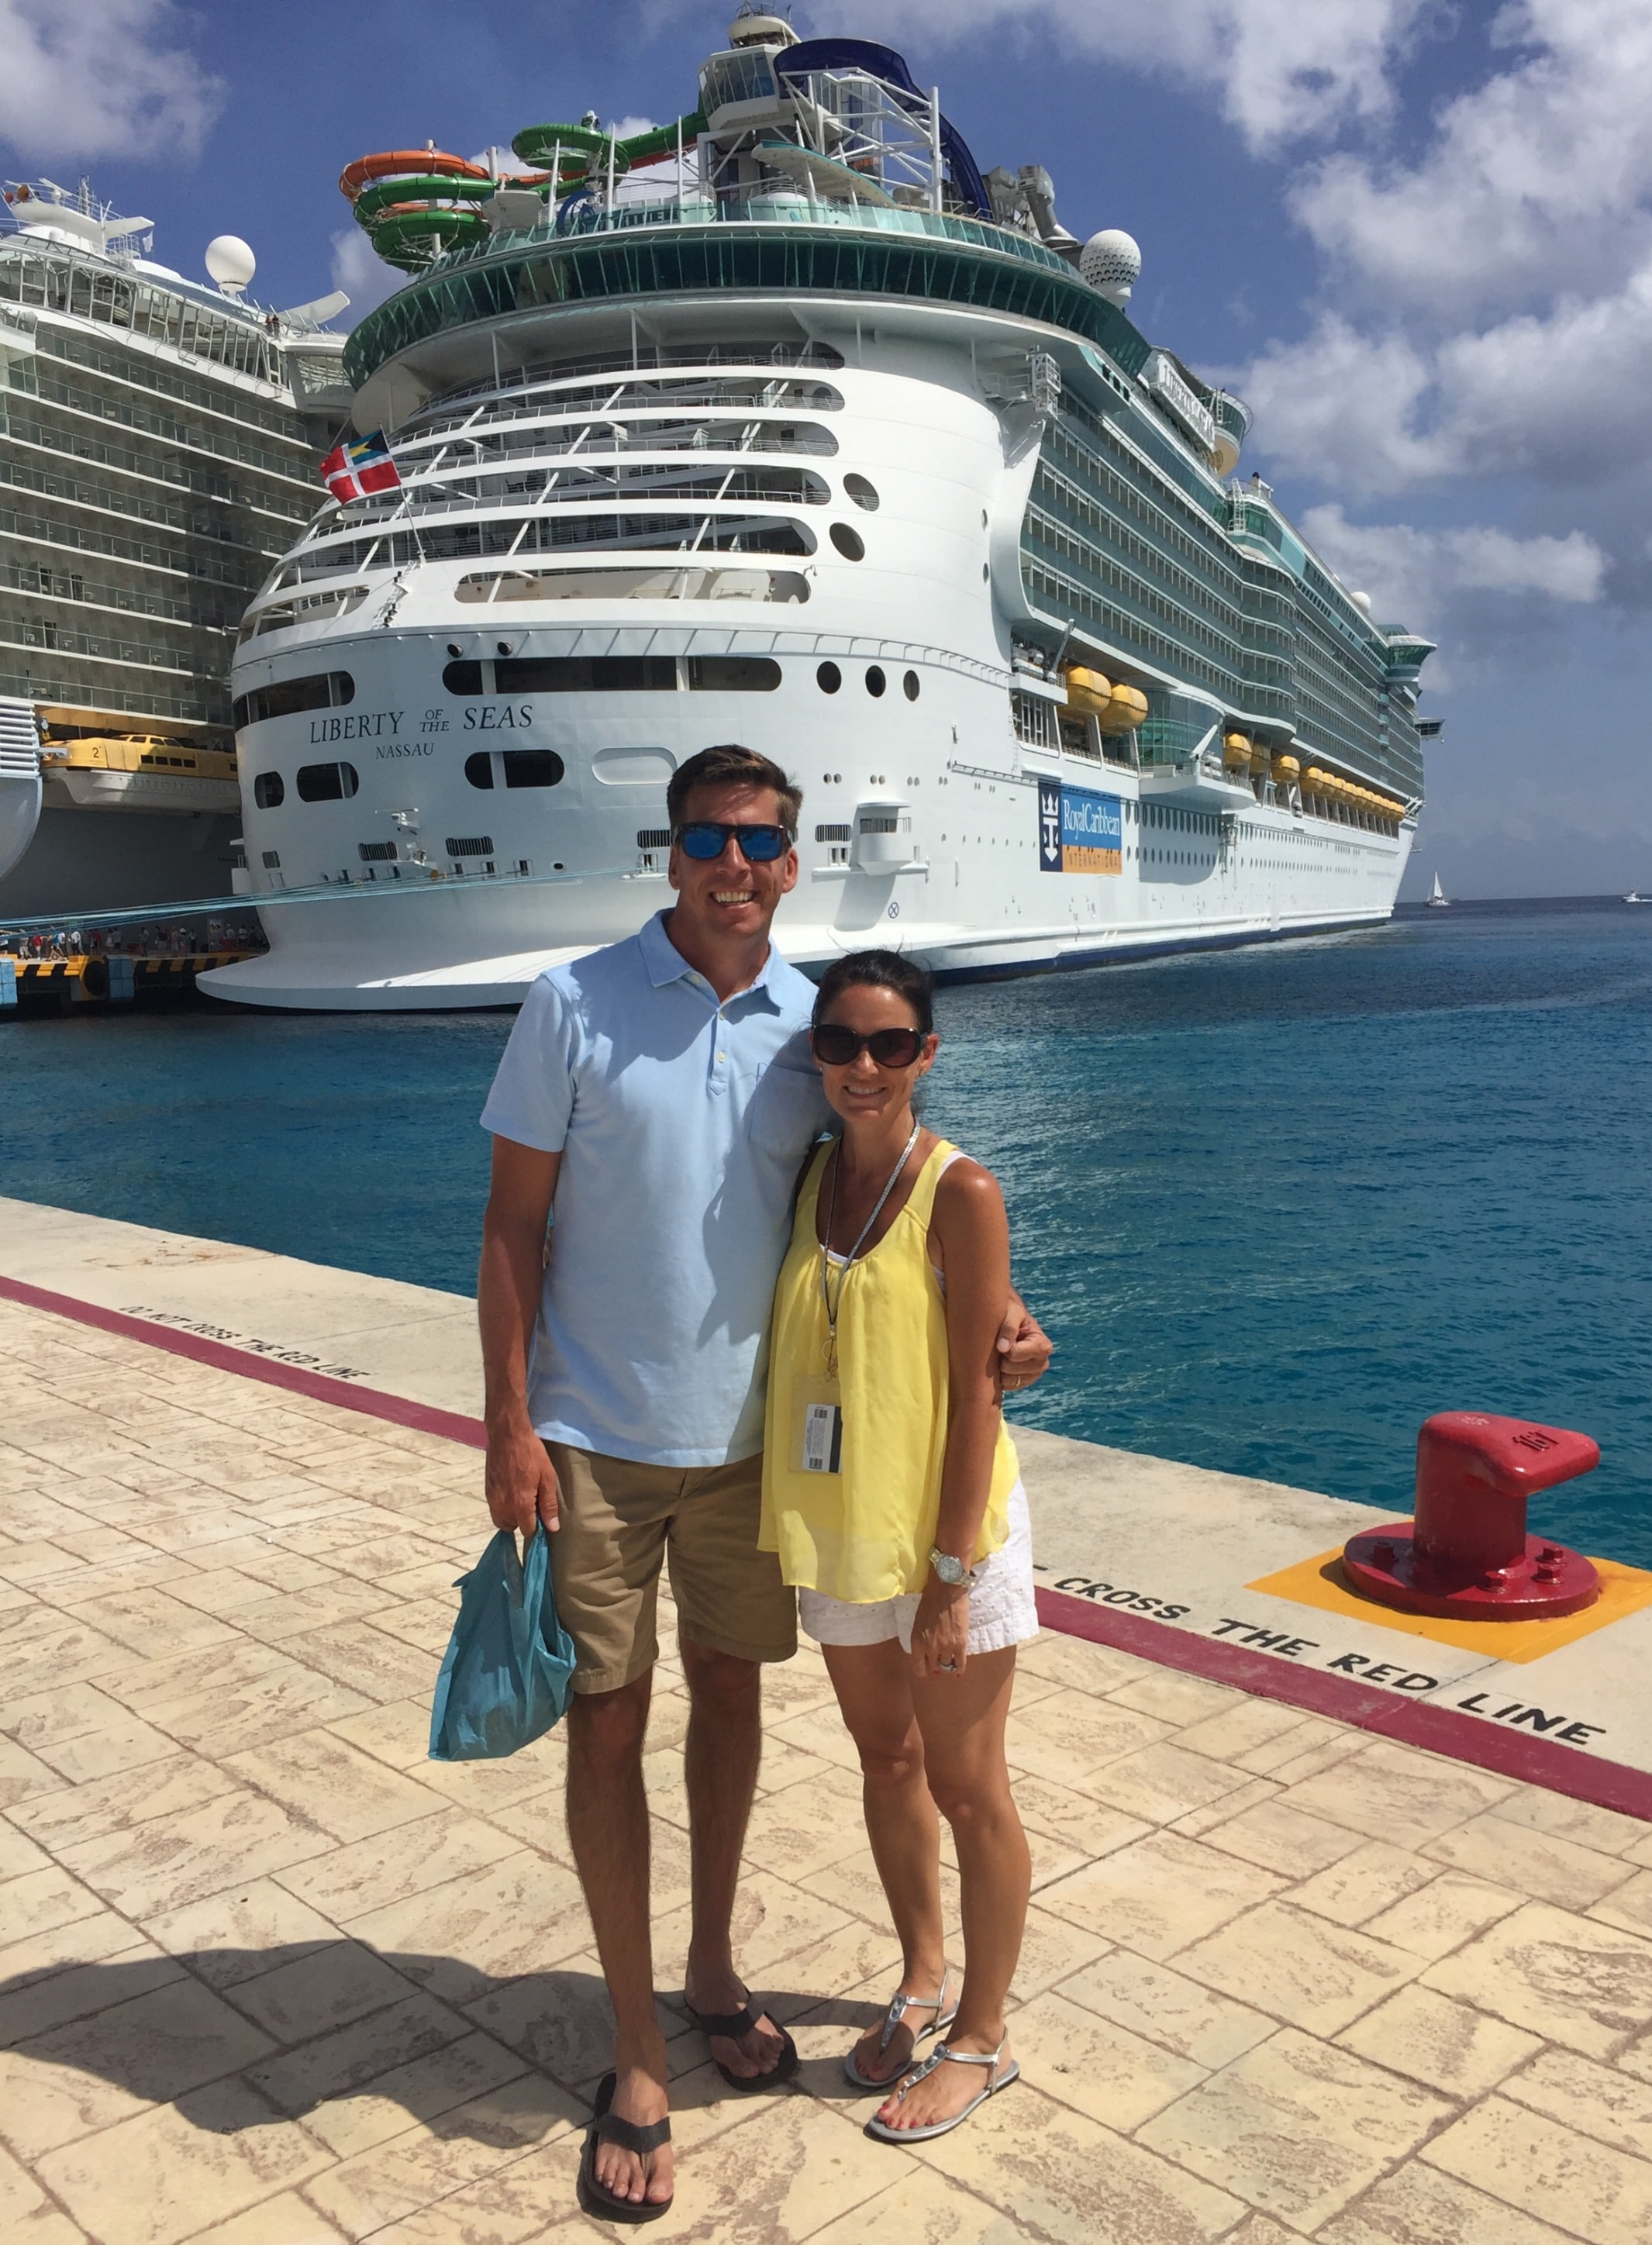 Man and woman in front of a large cruise ship in port